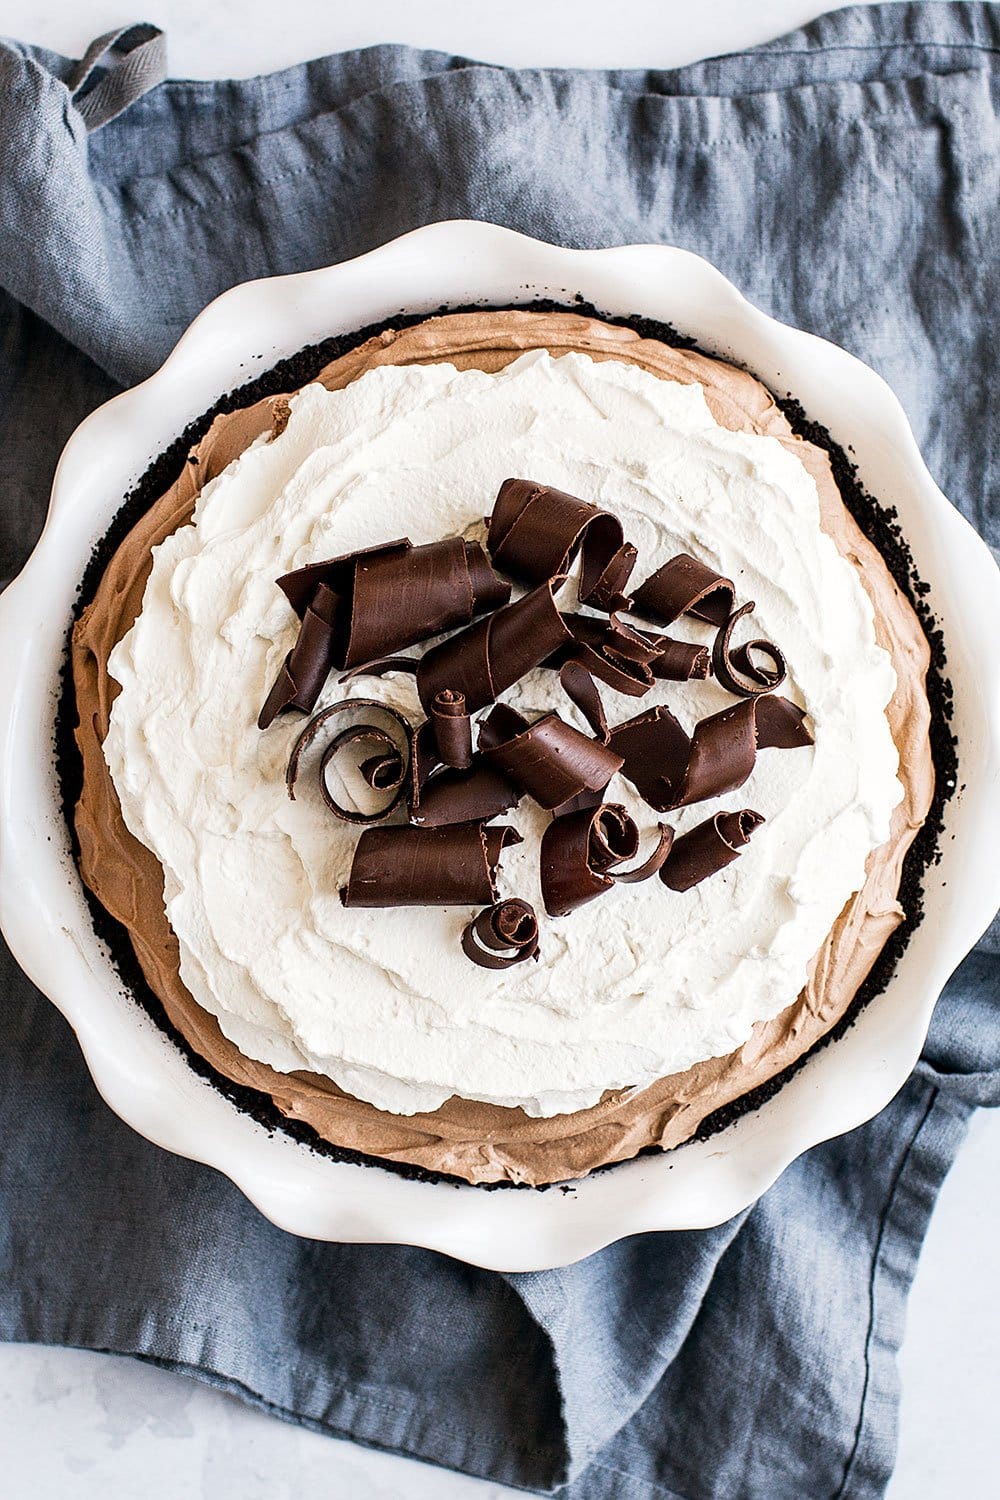 French Silk Pie in all its chocolatey deliciousness, ready for your Easter dessert table.